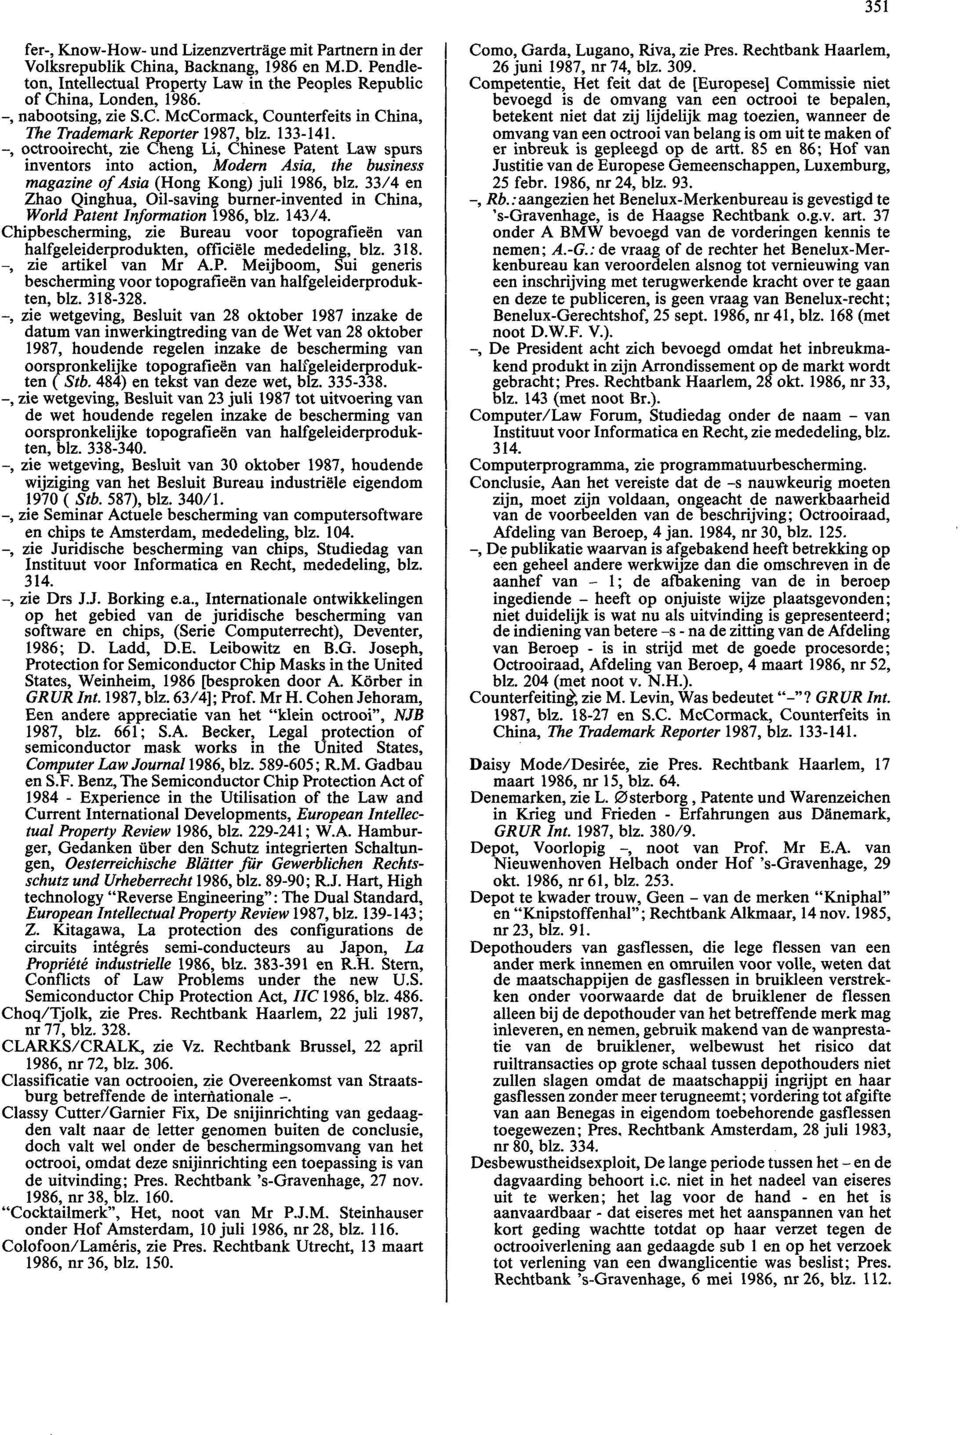 -, octrooirecht, zie Cheng Li, Chinese Patent Law spurs inventors into action, Modern Asia, the business magazine of Asia (Hong Kong) juli 1986, blz.